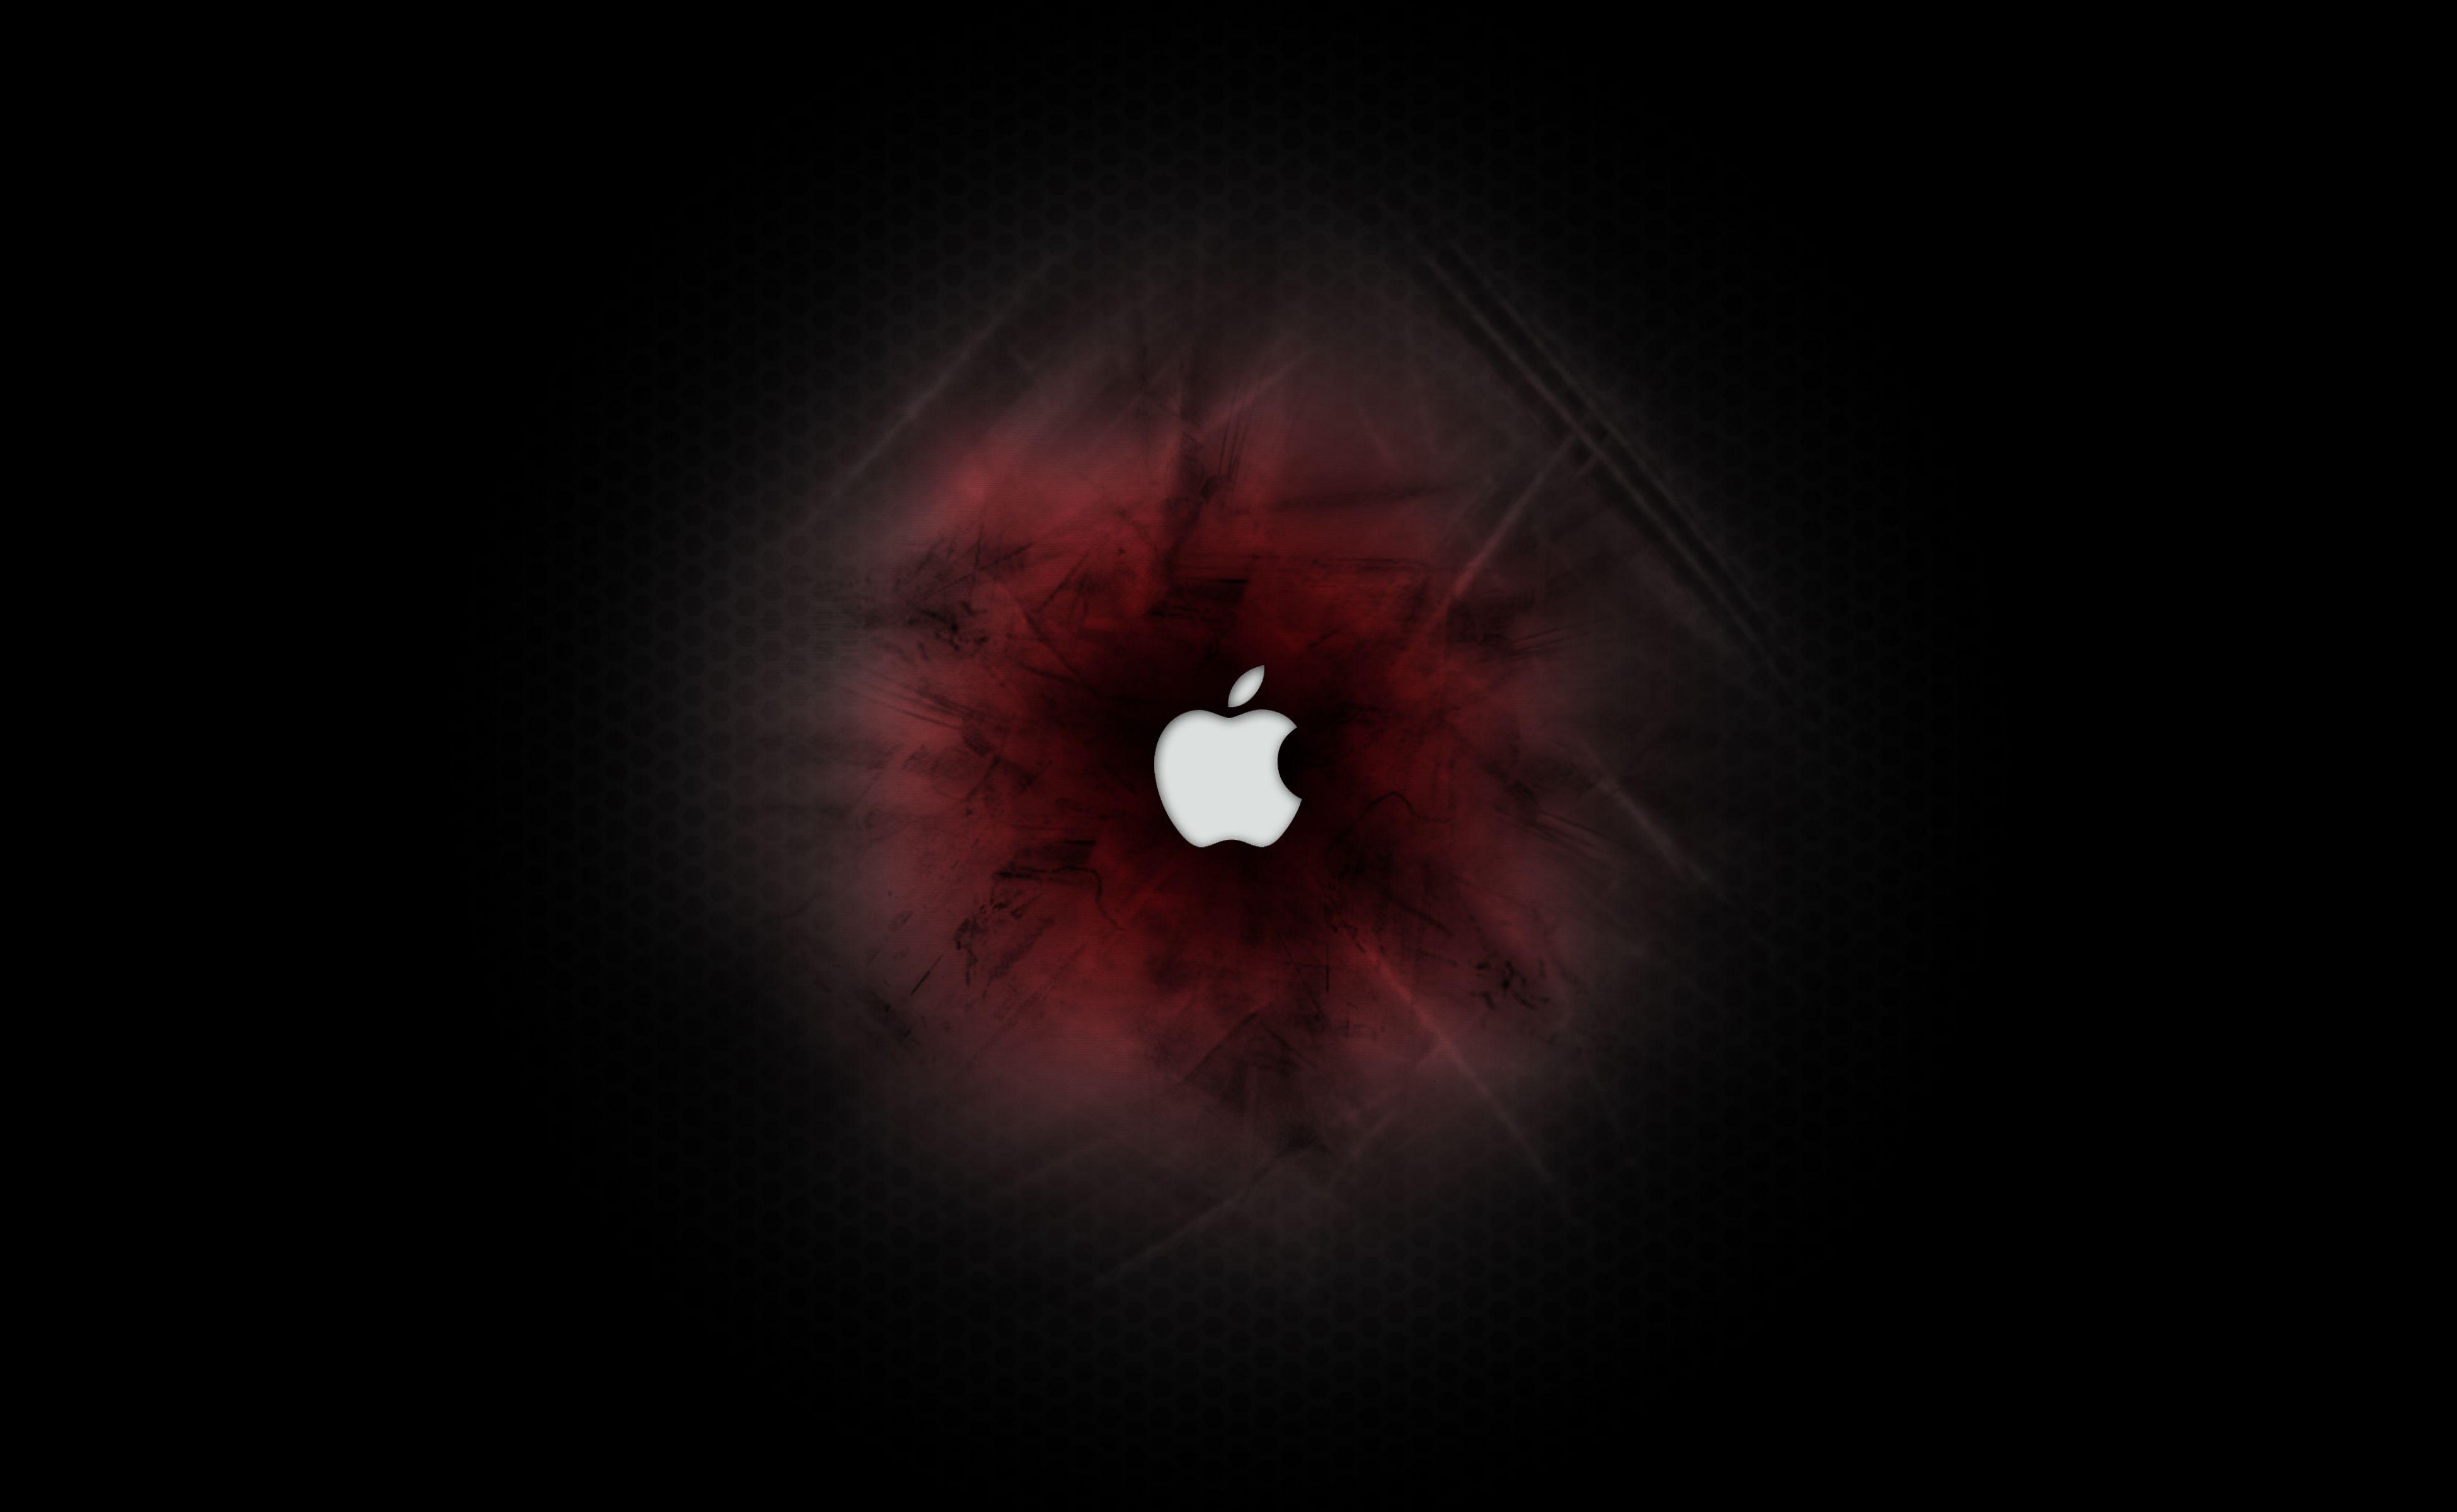 Red Apple background 4k Ultra HD Wallpaper. Background